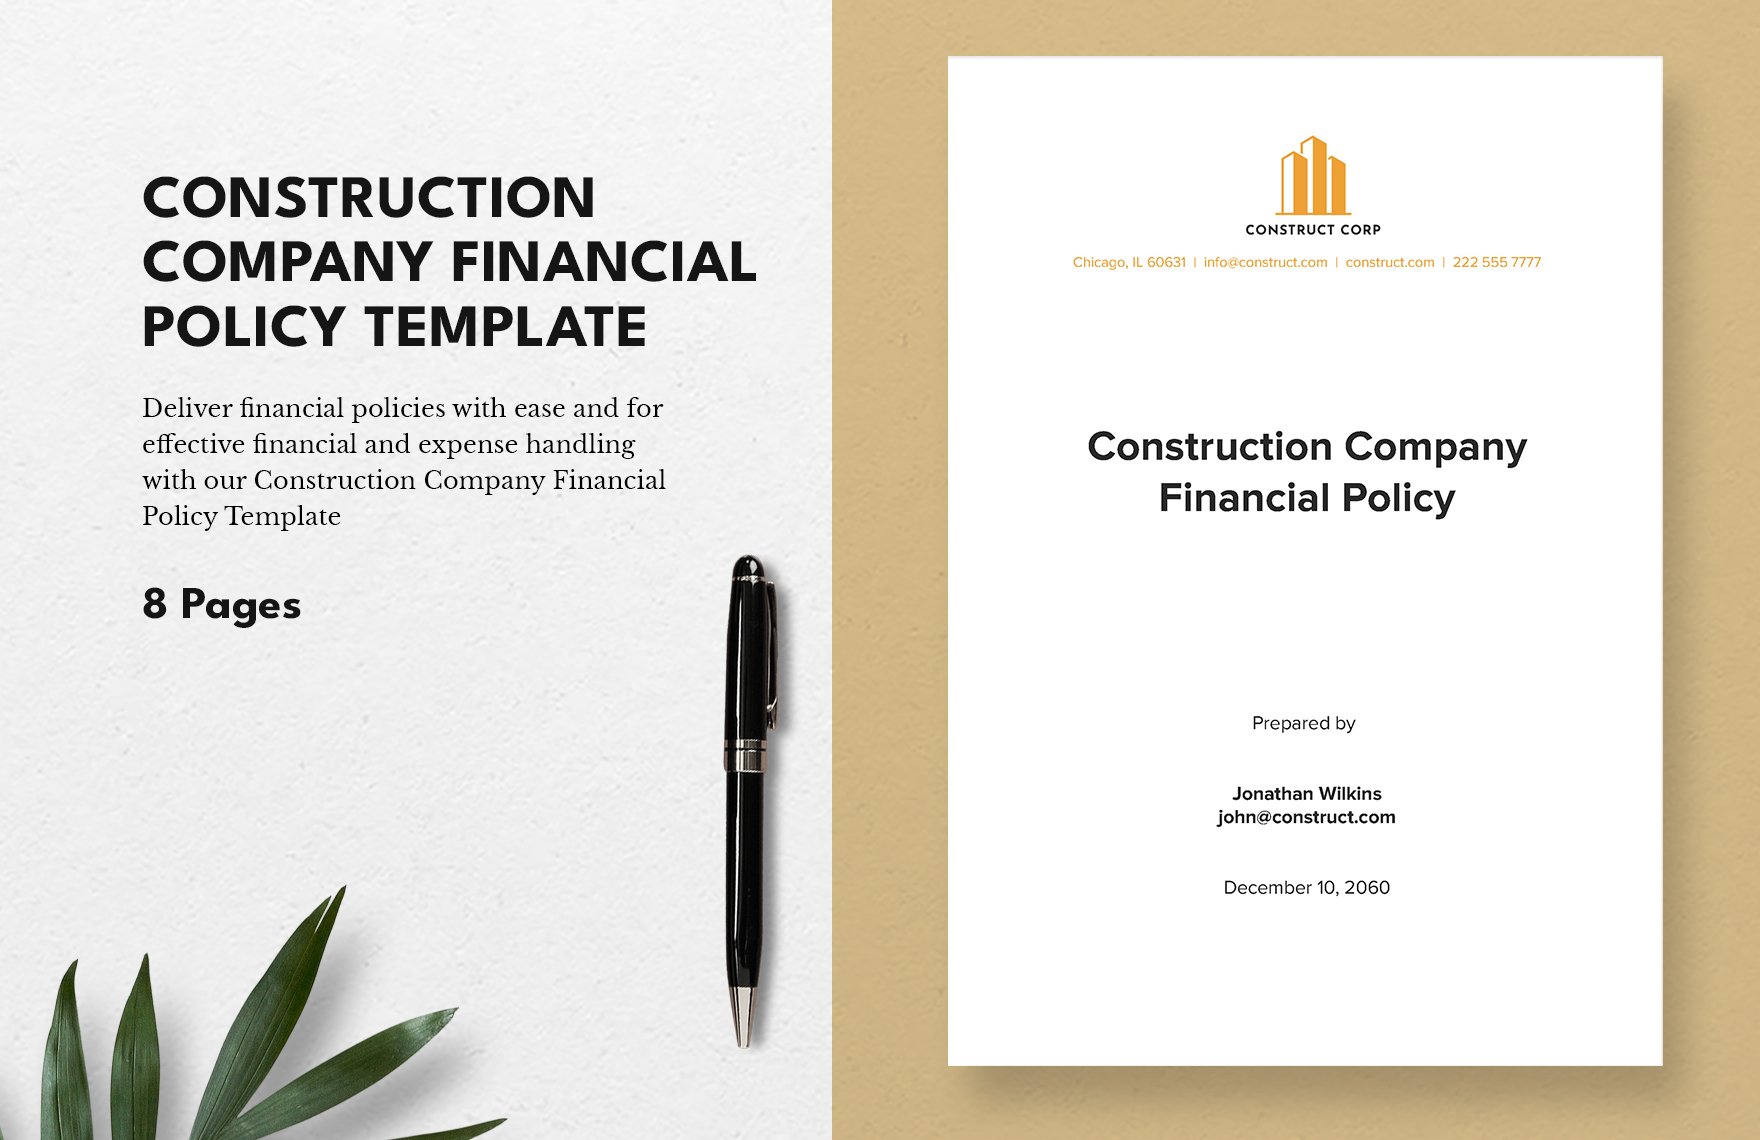 Construction Company Financial Policy Template